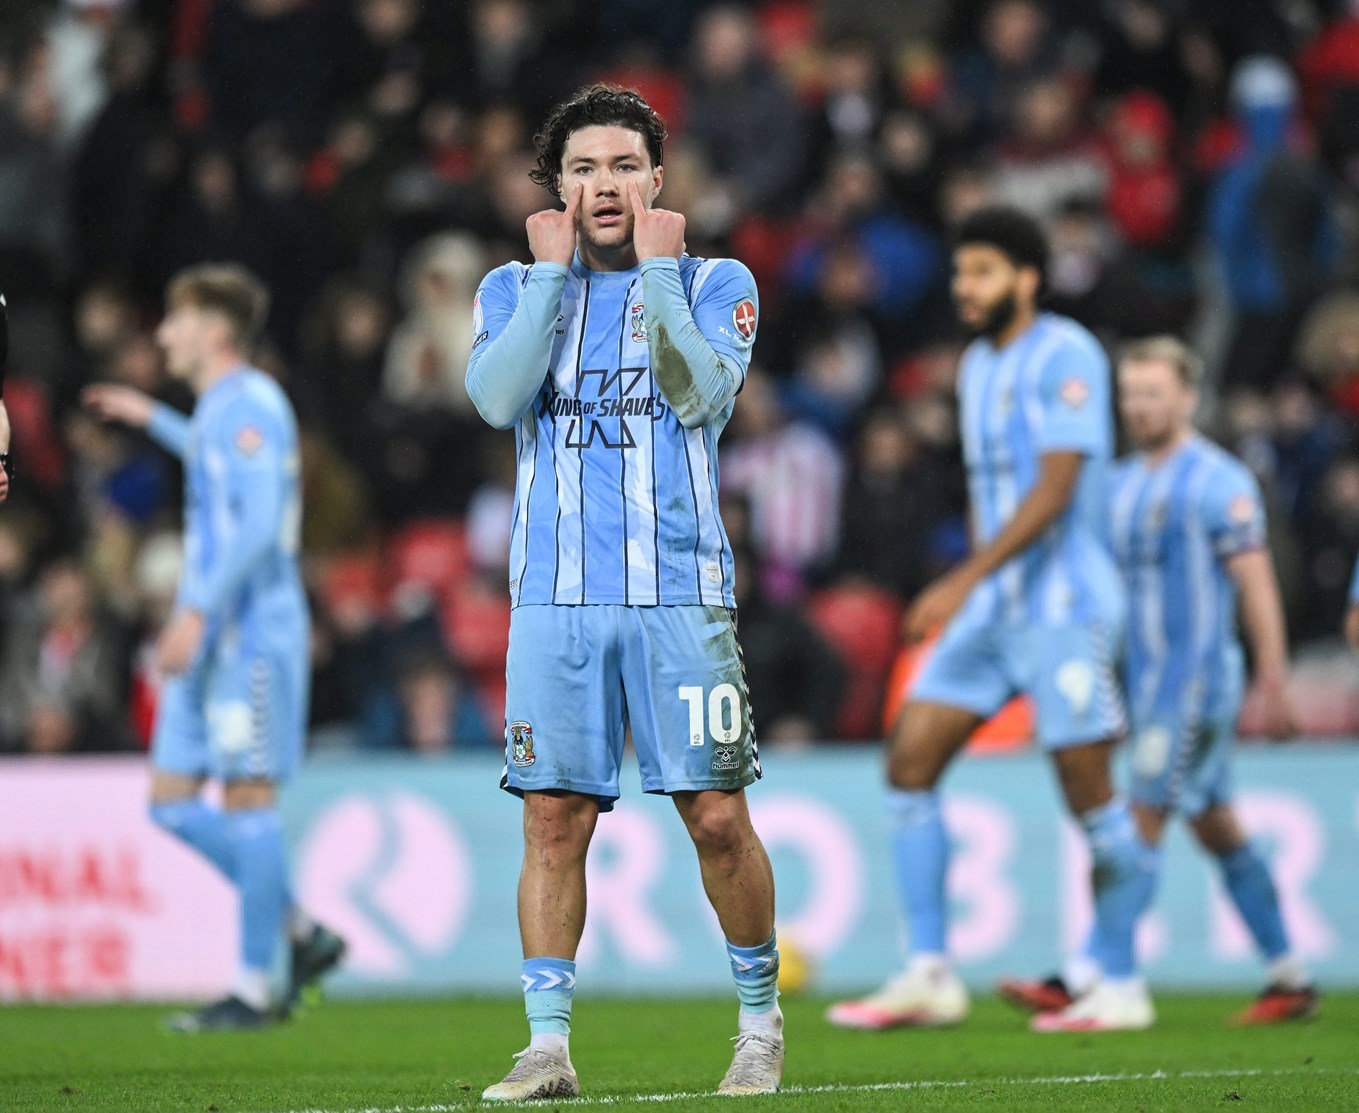 INTERVIEW: Callum O'Hare on Sunderland goal, victory at the Stadium of  Light and feeling confident - News - Coventry City